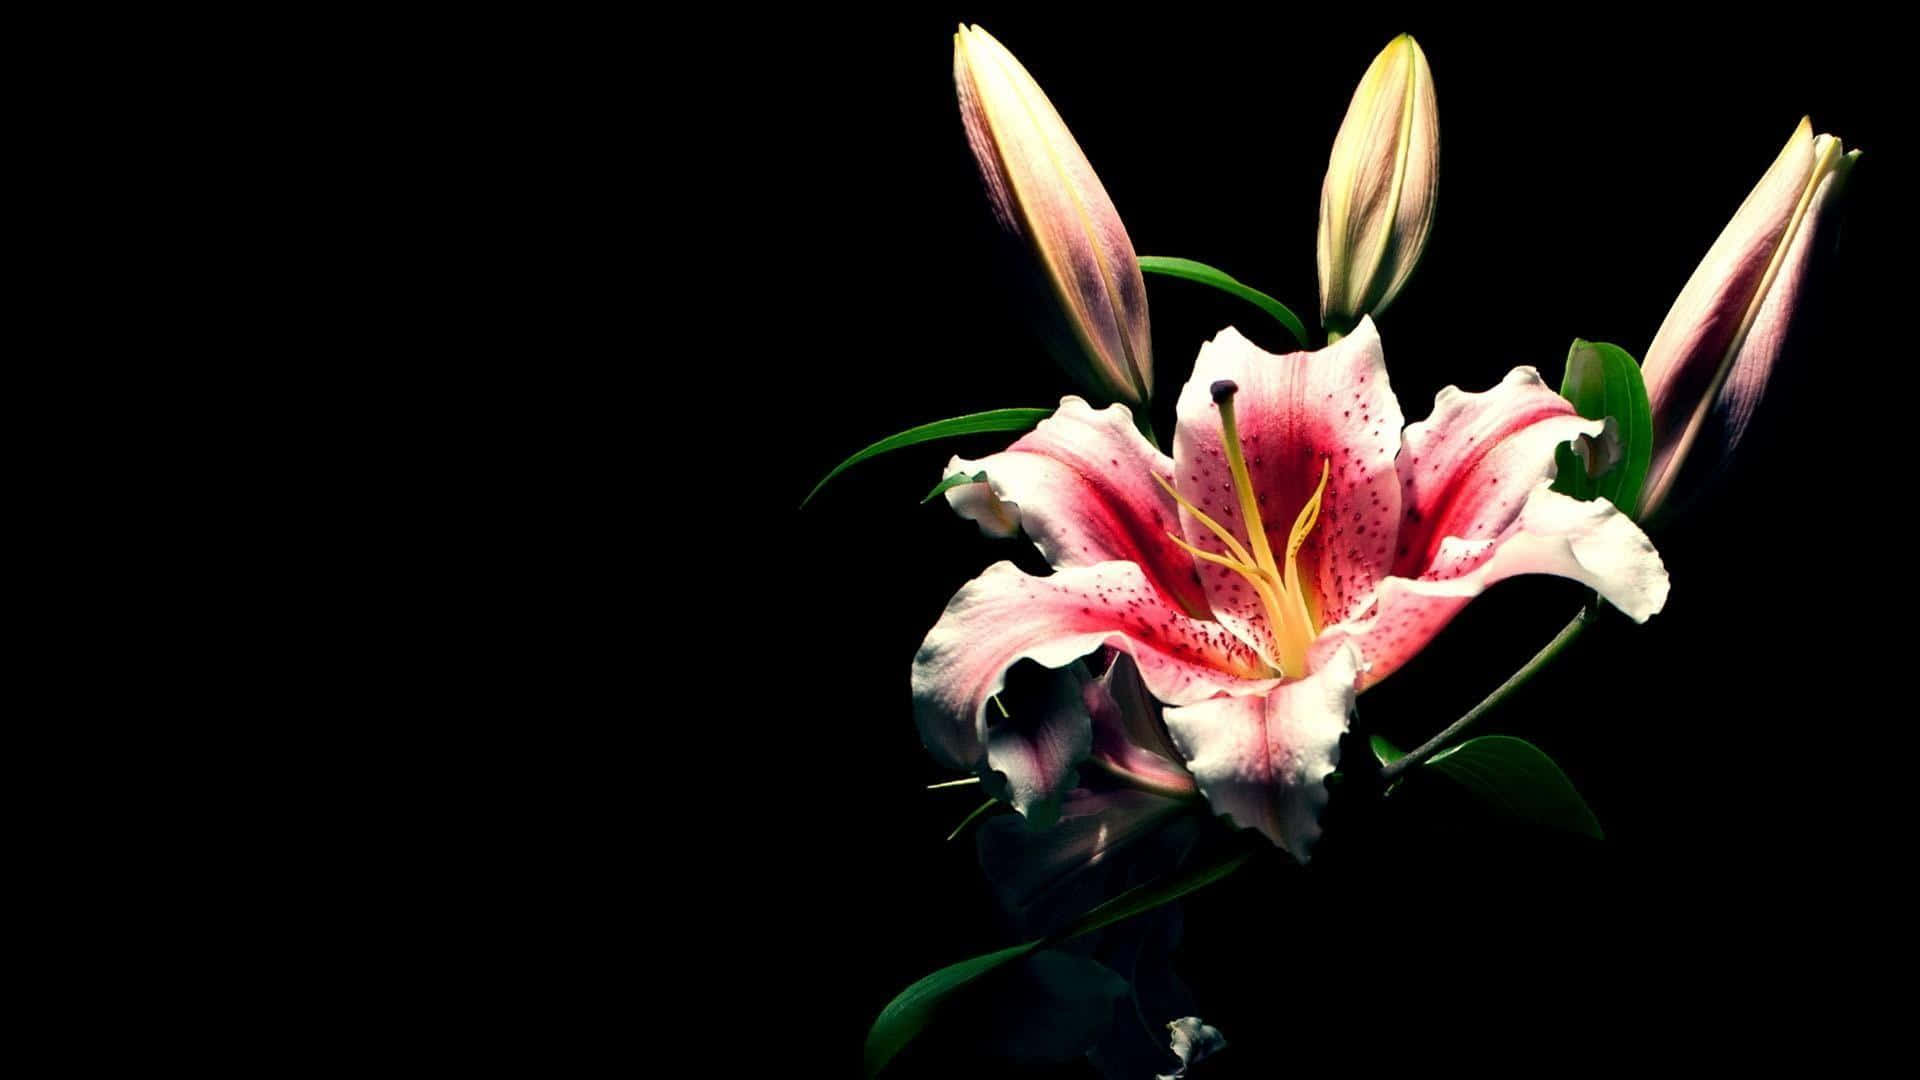 A Pink Lily Is In A Vase Against A Black Background